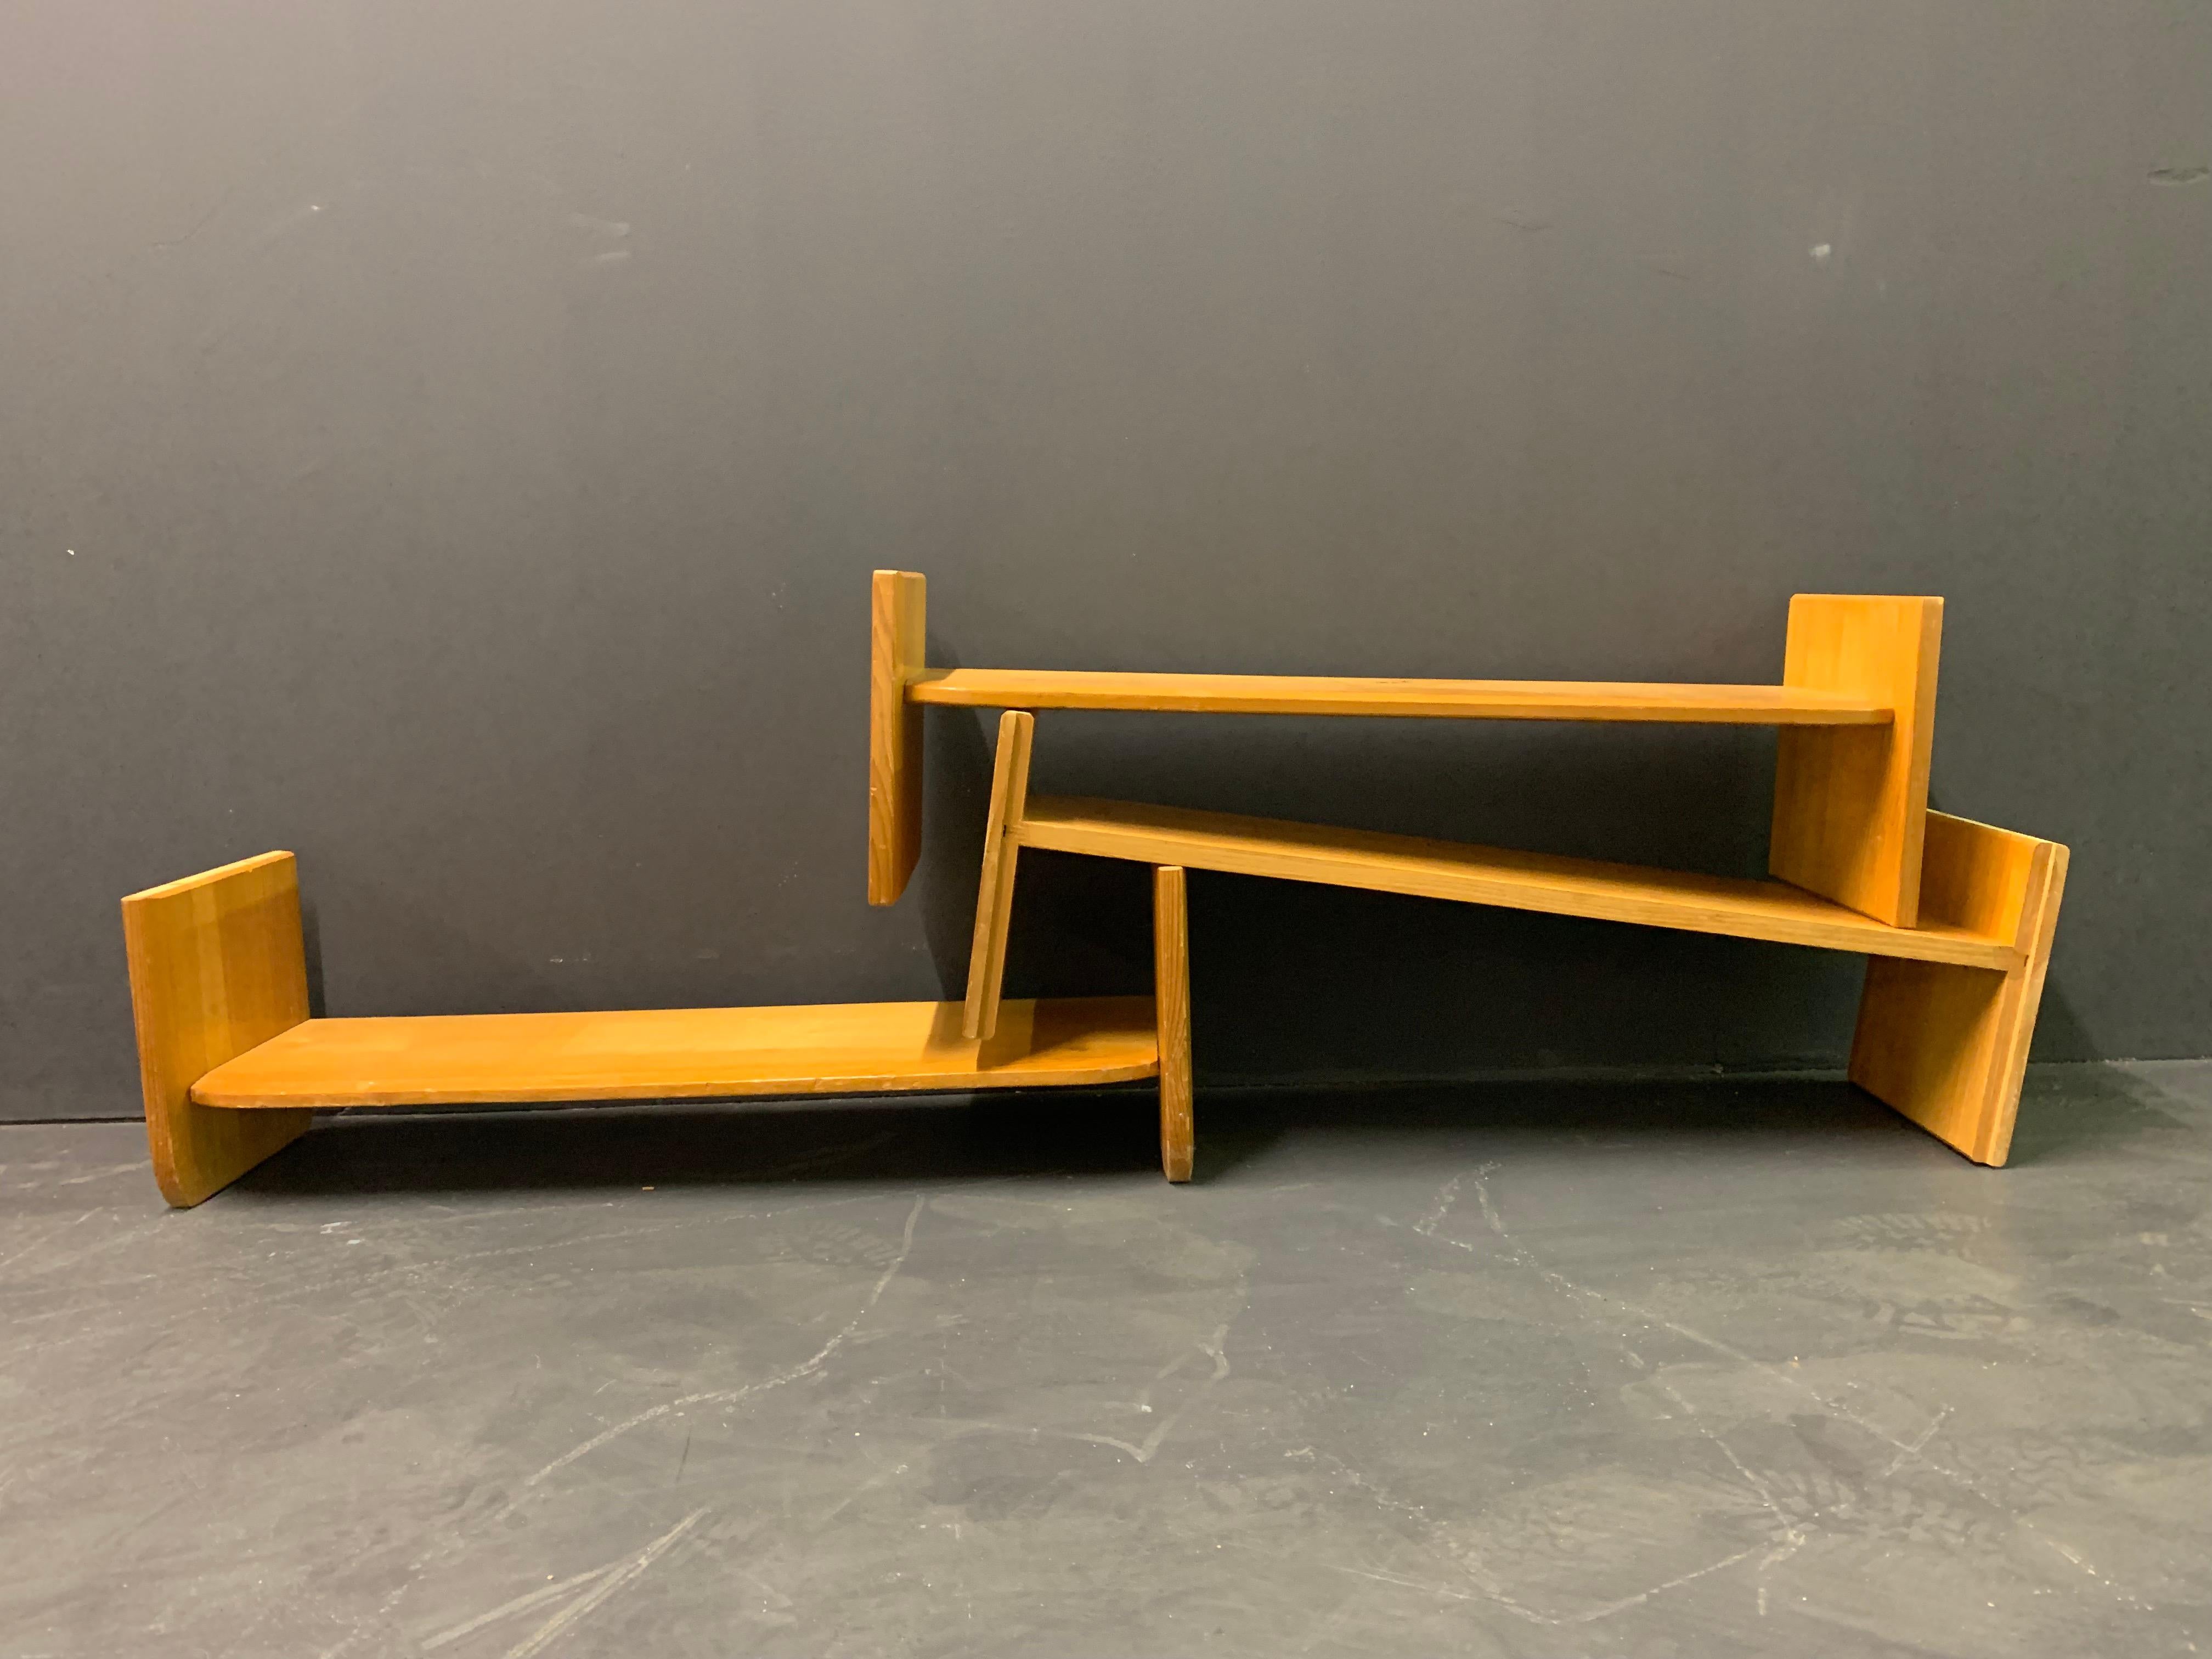 Swiss design pinewood bookshelf designed by Jacob Müller, who along with Max Bill and Willy Guhl, was a leading designer for the Swiss Furniture Group, Wohnhilfe. The shelves can be stacked in two ways to increase the height between the shelves for